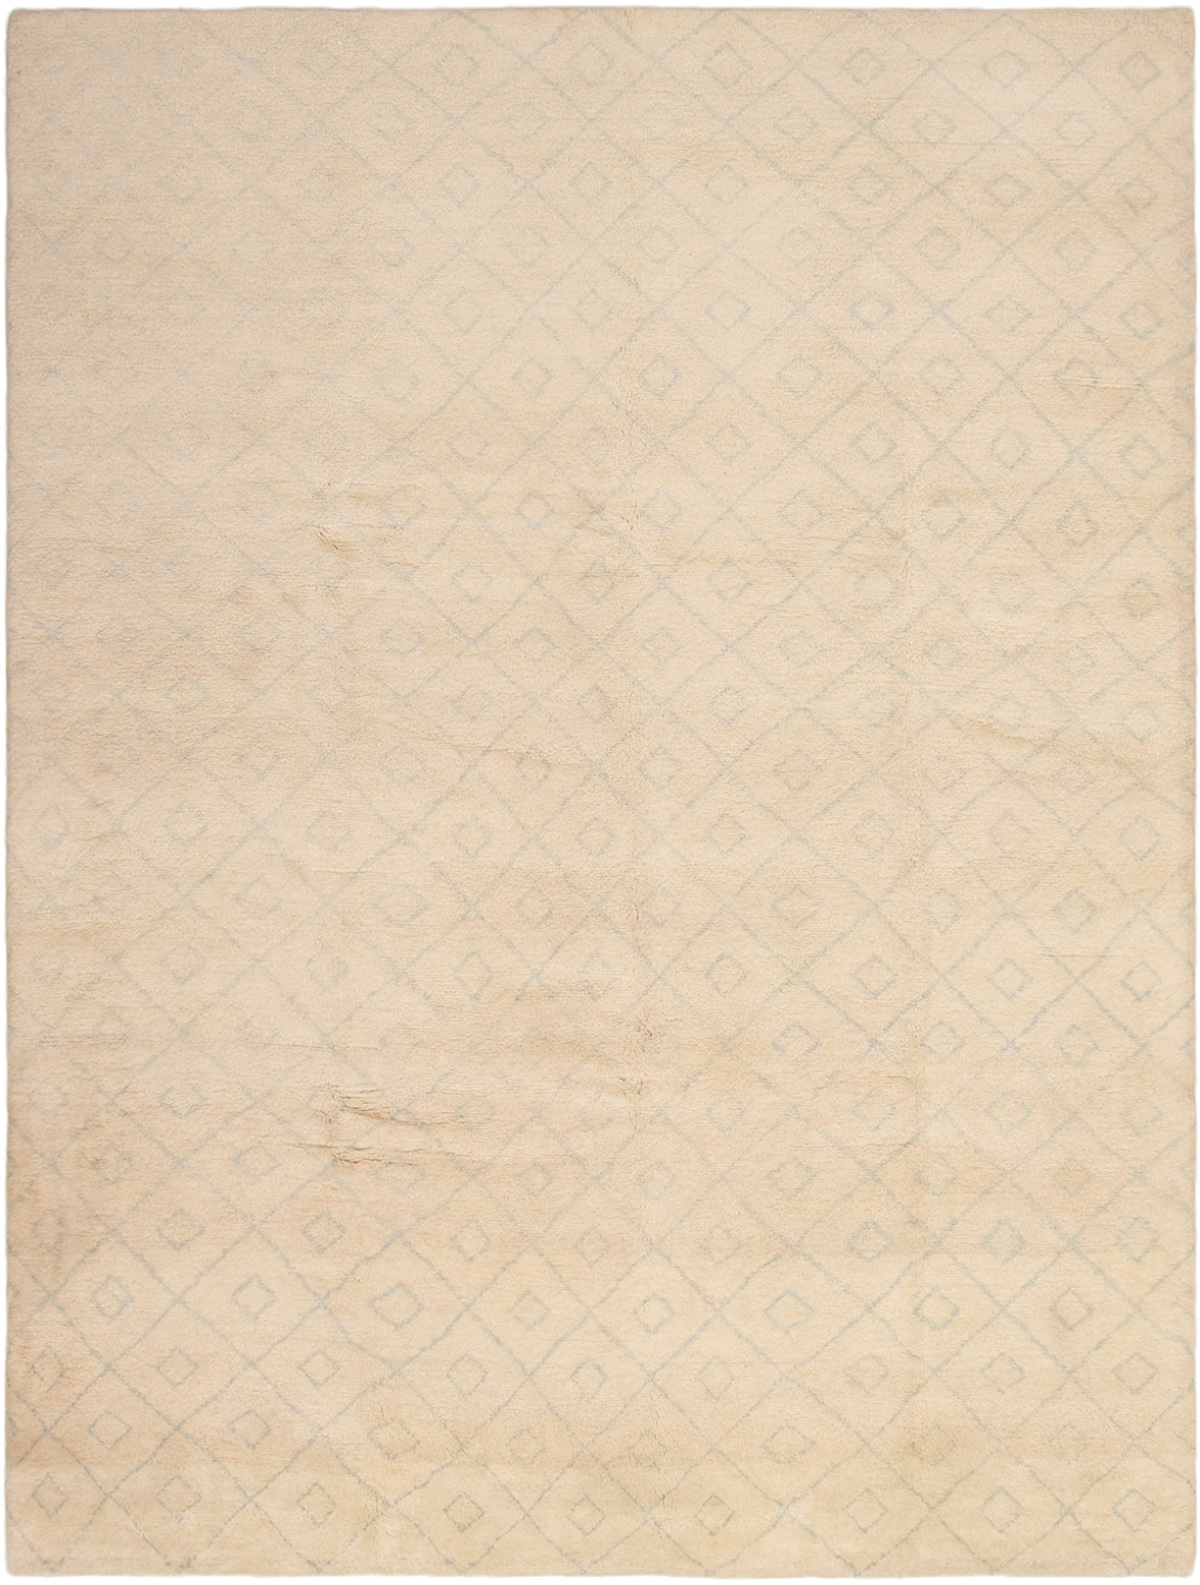 Hand-knotted Arlequin Cream Wool Rug 9'2" x 12'2" Size: 9'2" x 12'2"  